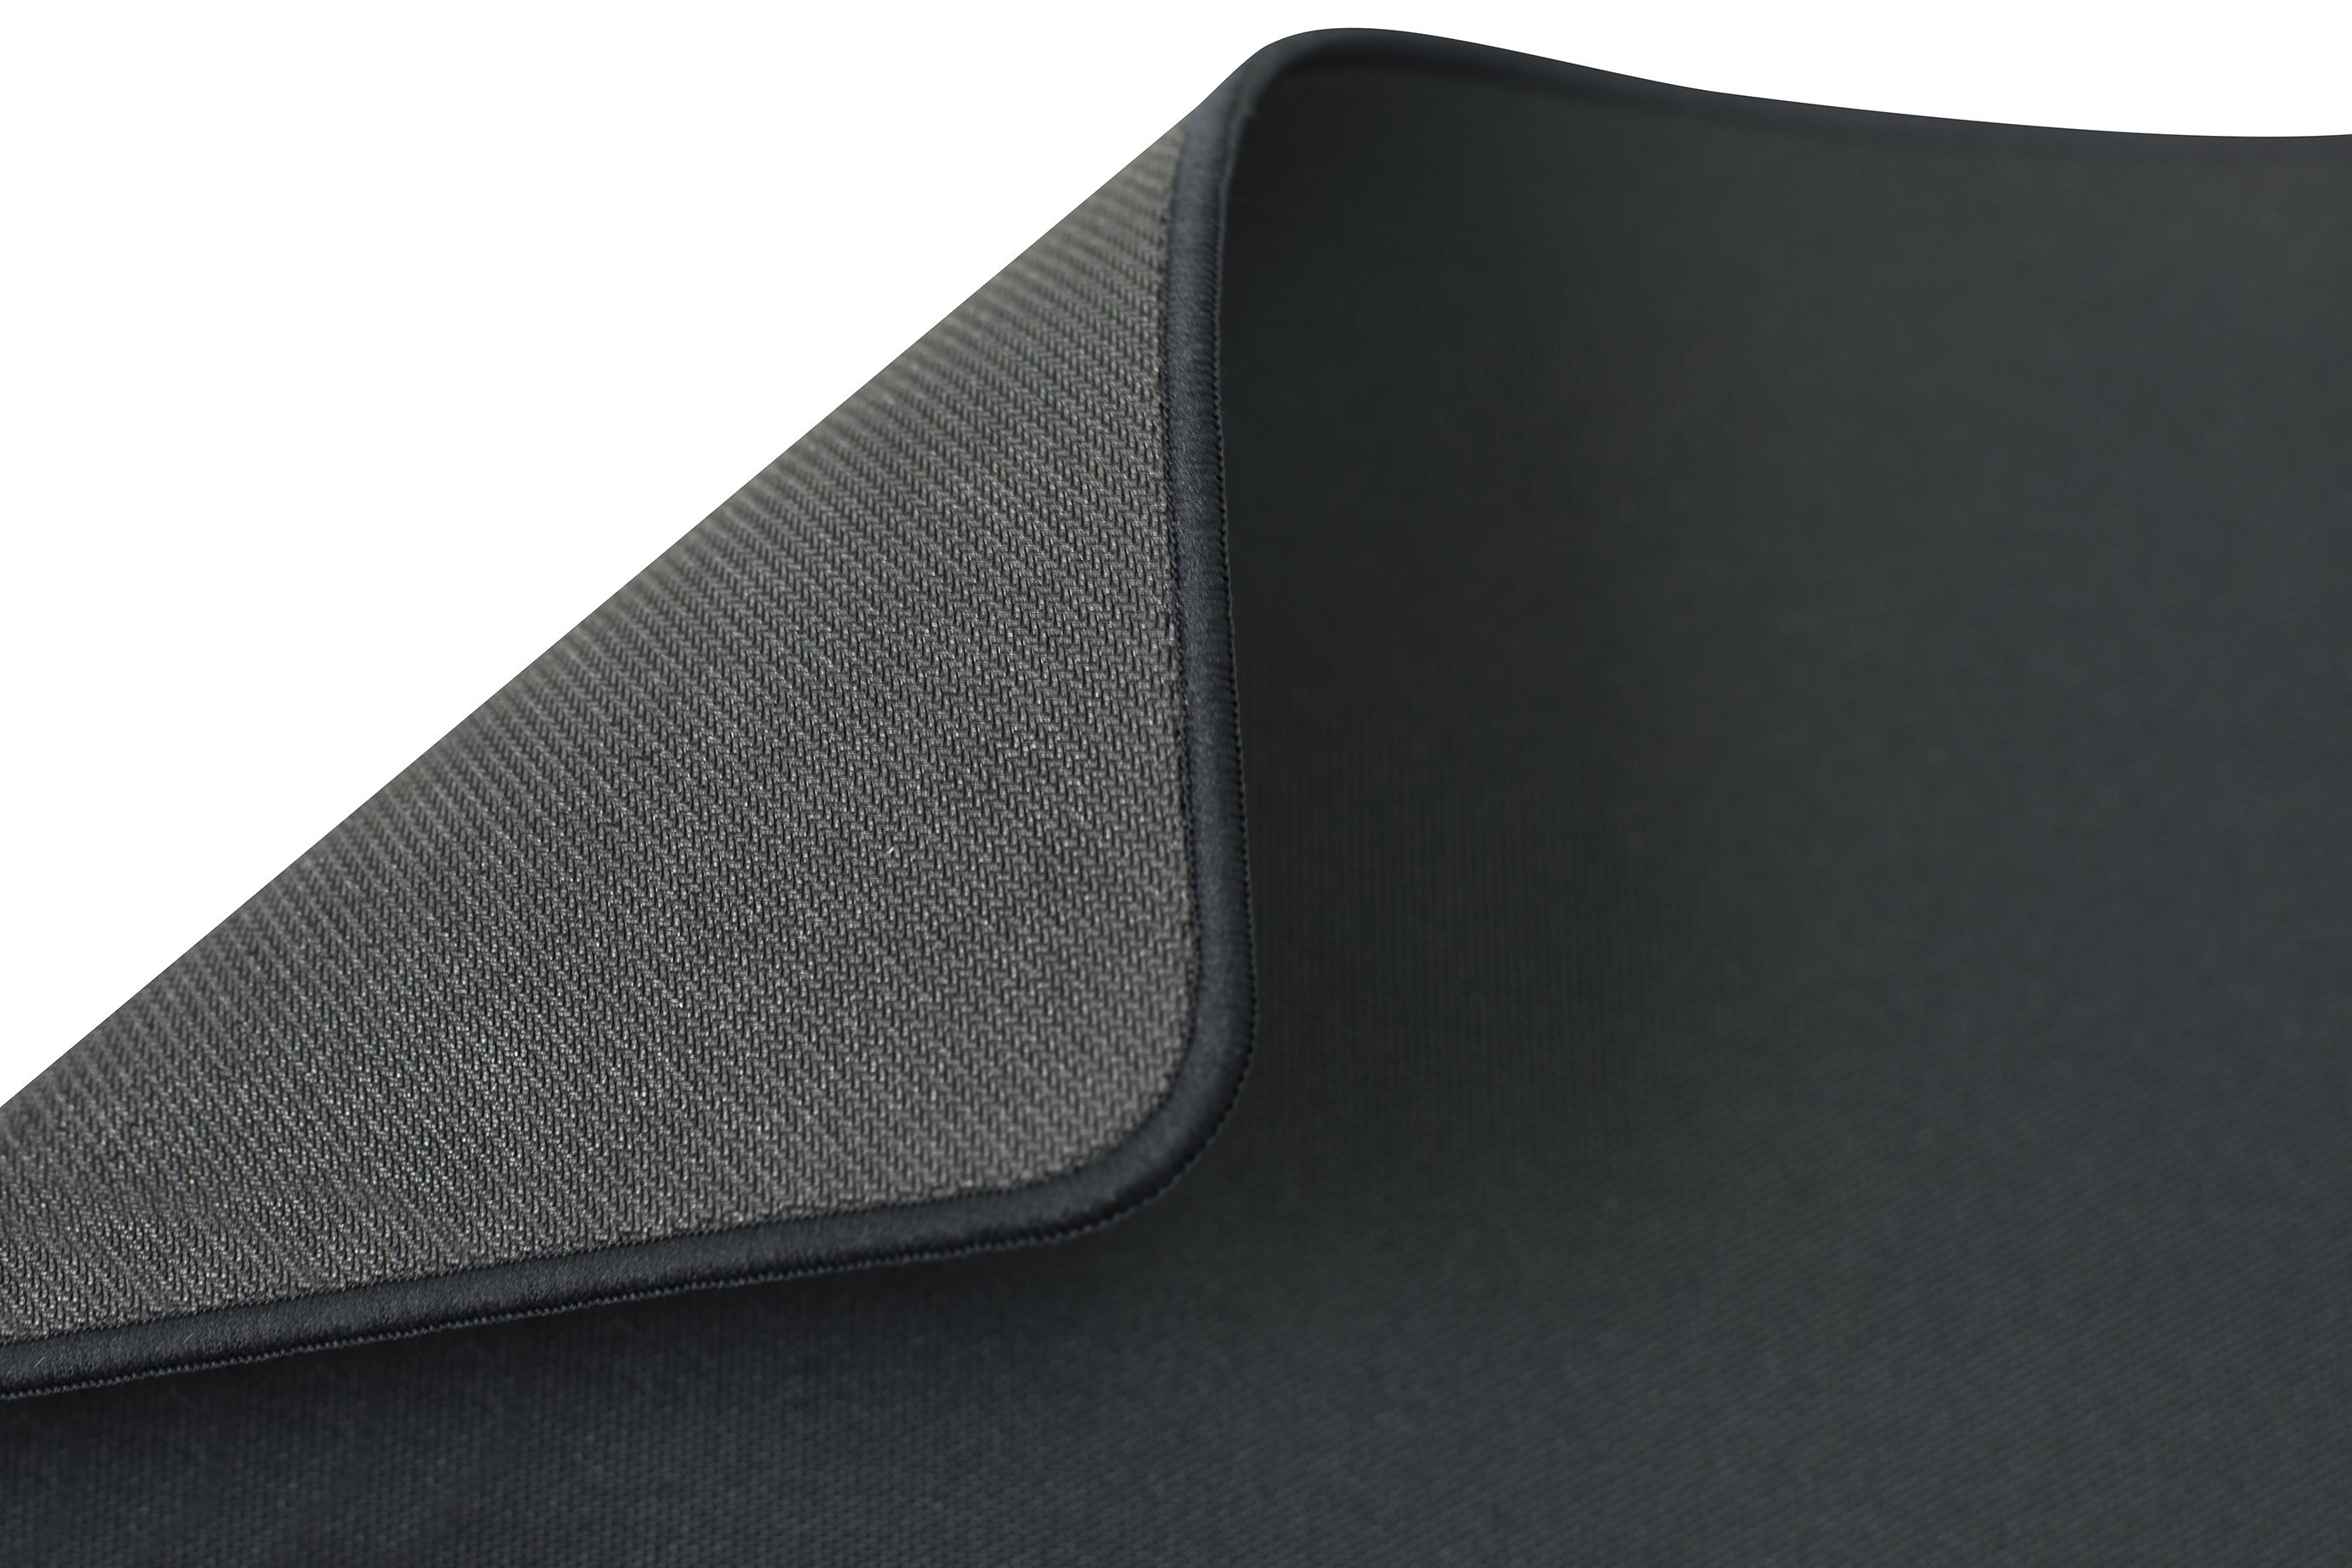 COOLER MASTER MASTERACCESSORY MP510 XL BLACK 900X400MM MOUSE PAD